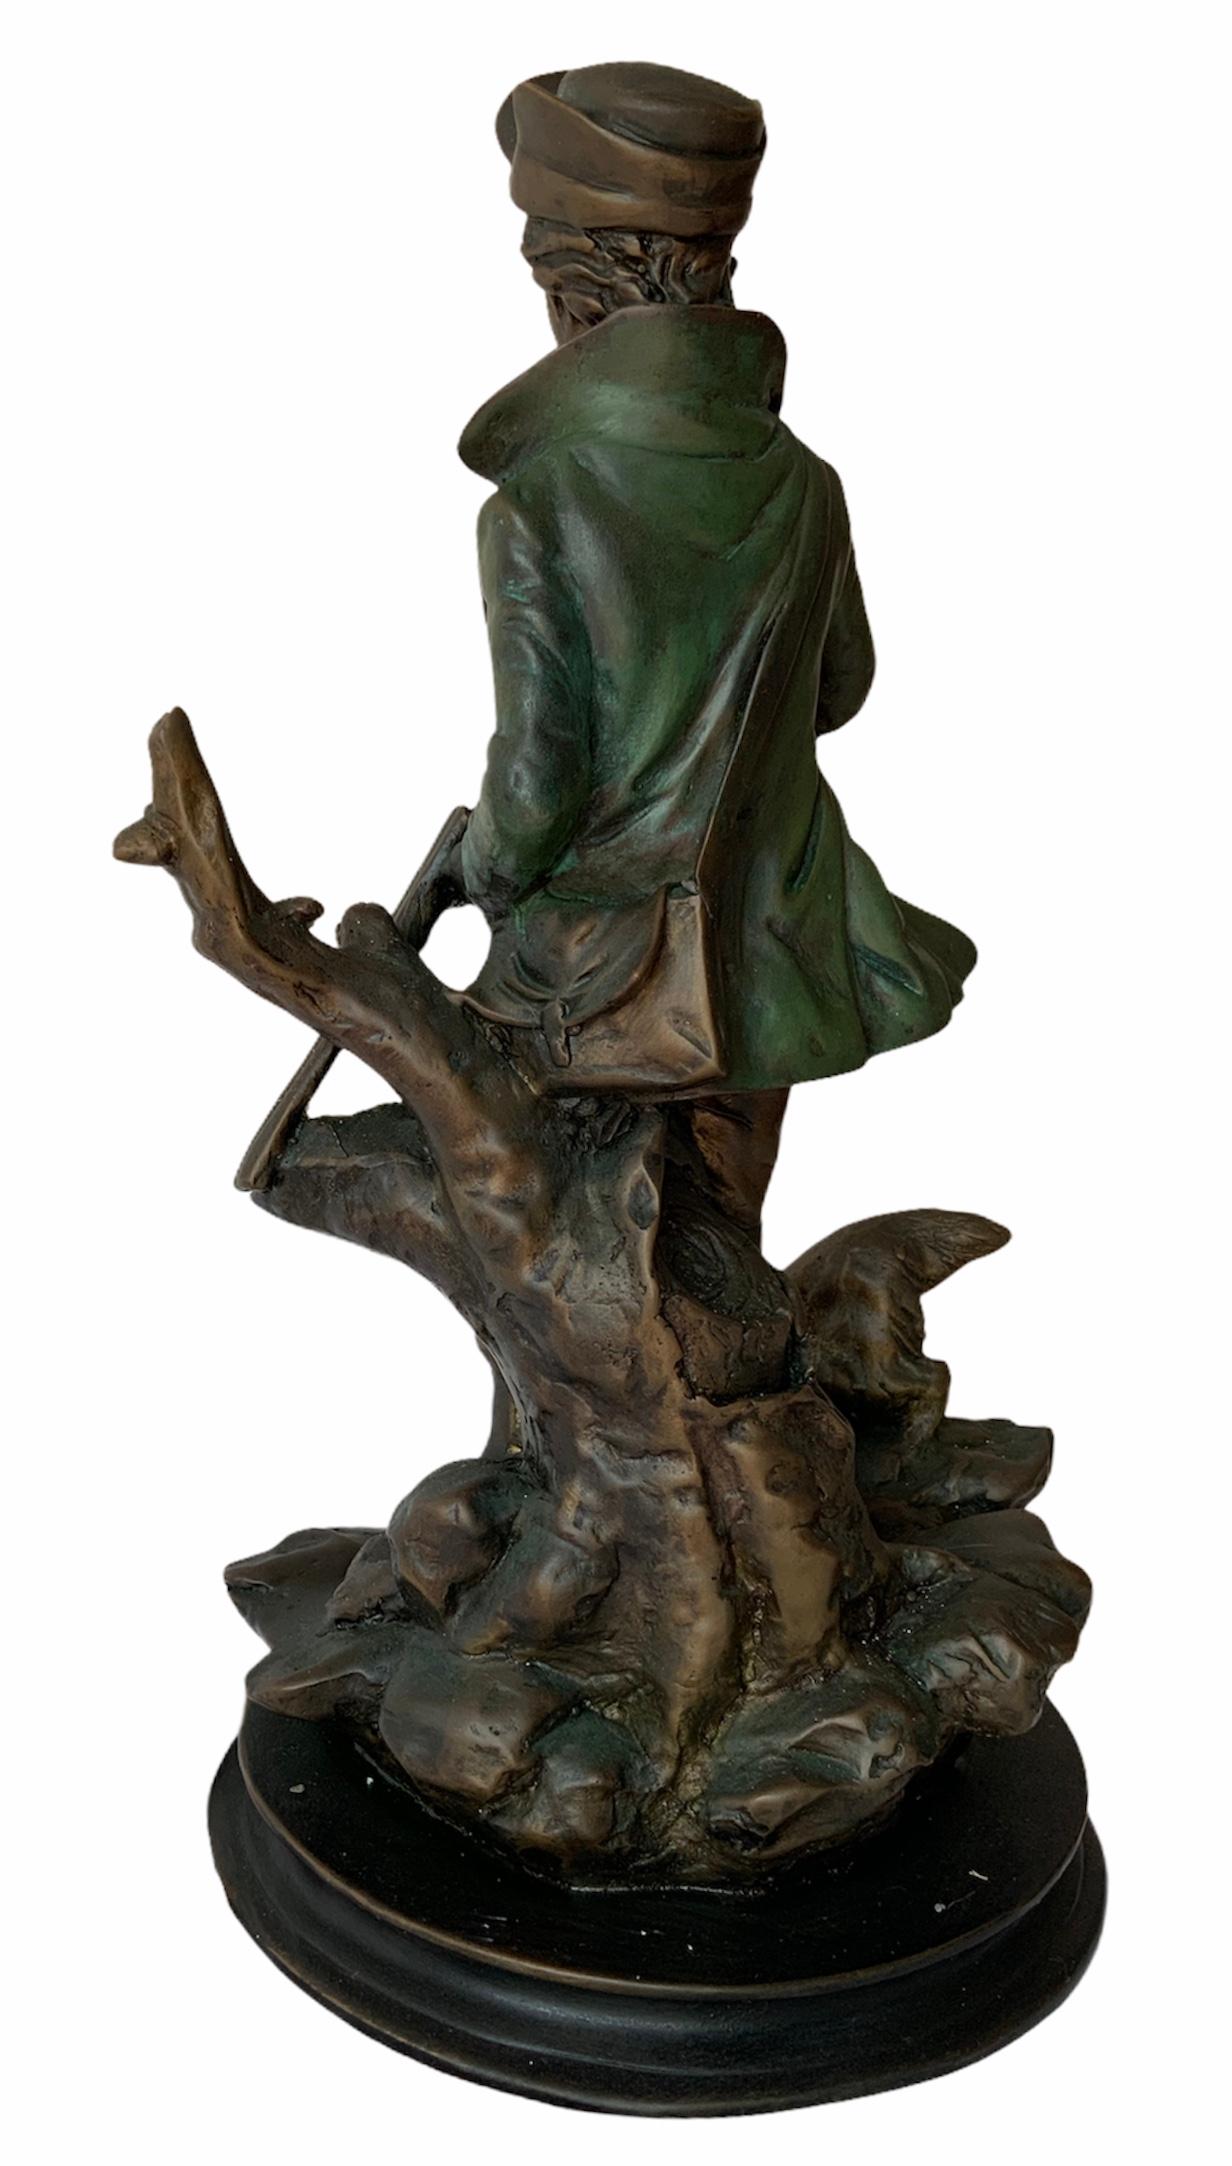 This a metal sculpture of a young man hunter with his dog. He is dressed with an open green coat, long pants, pair of boots, a hat and a bullet belt around his waist. It appears that he is loading his rifle. He is standing in front of a cut tree